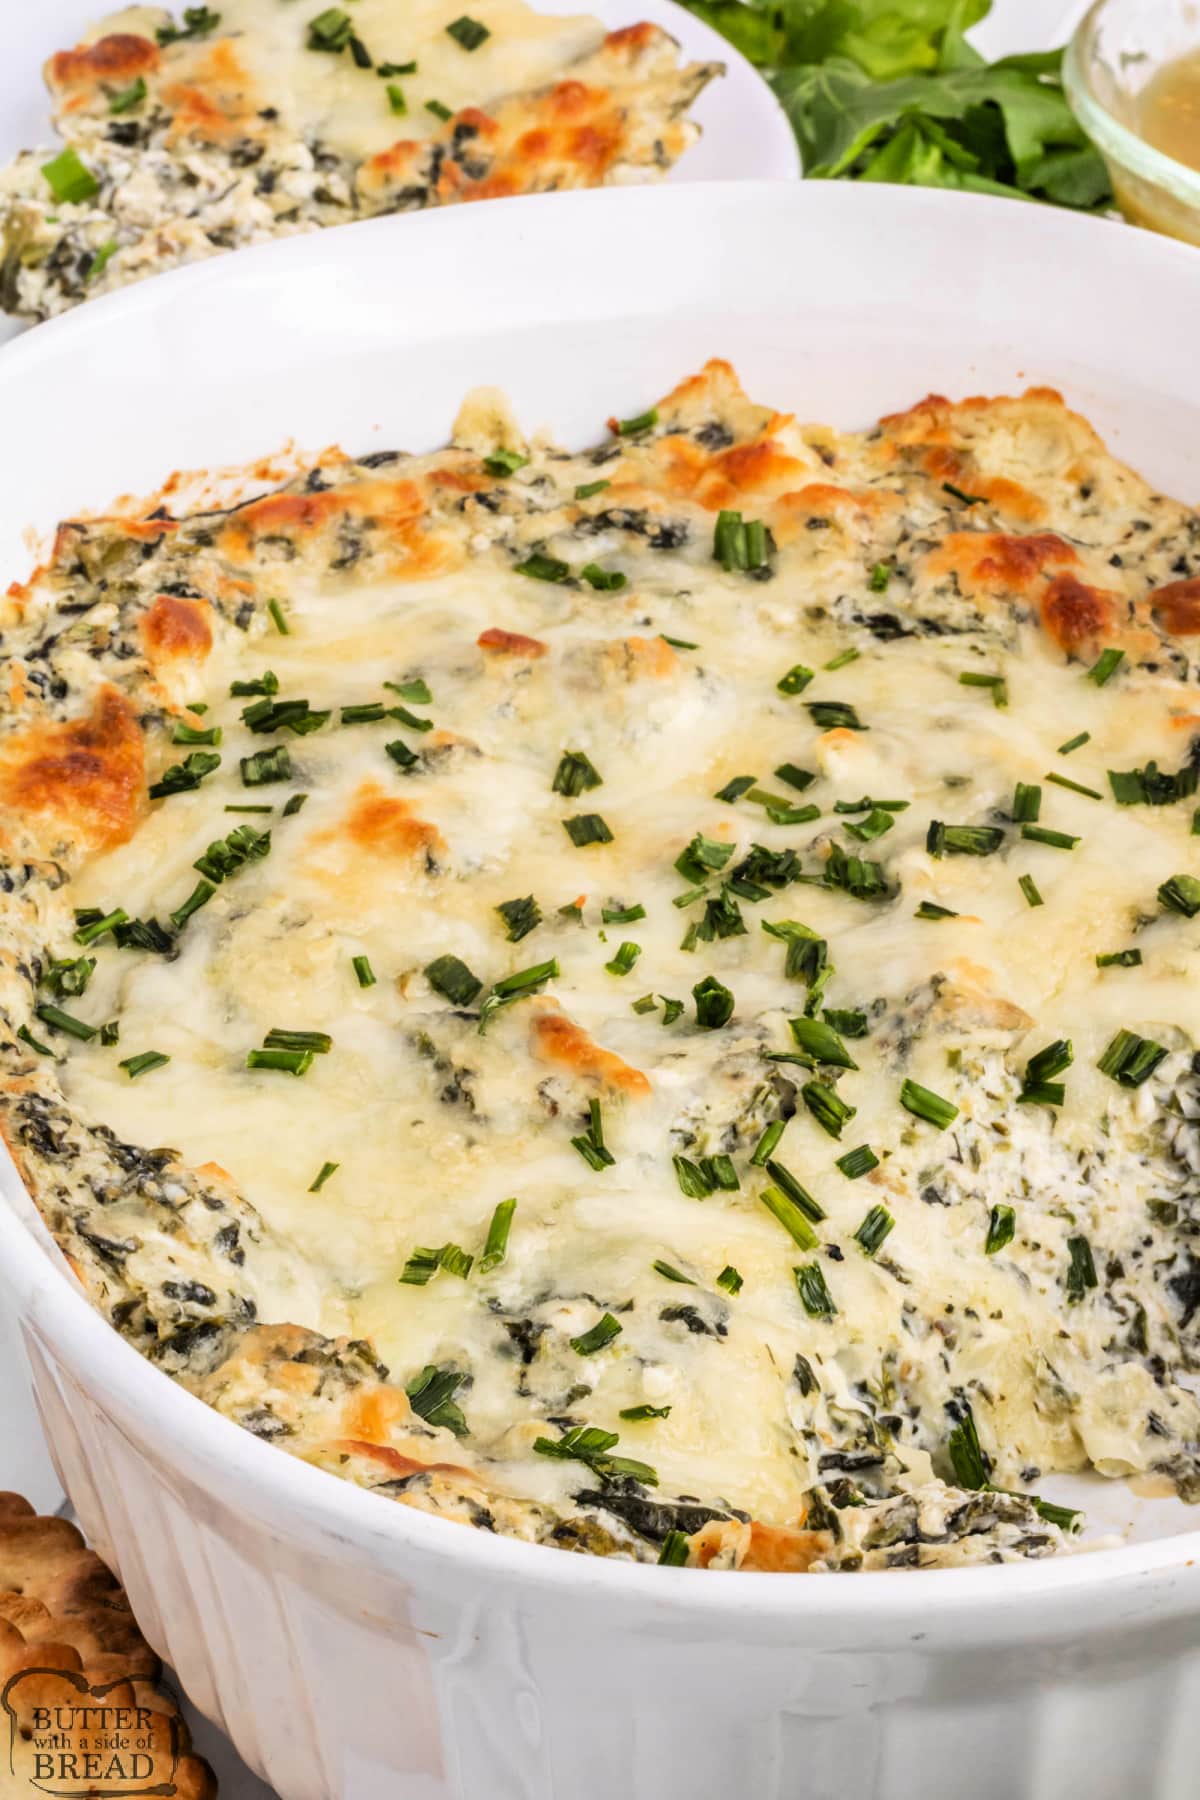 Baked spinach dip recipe with cream cheese.